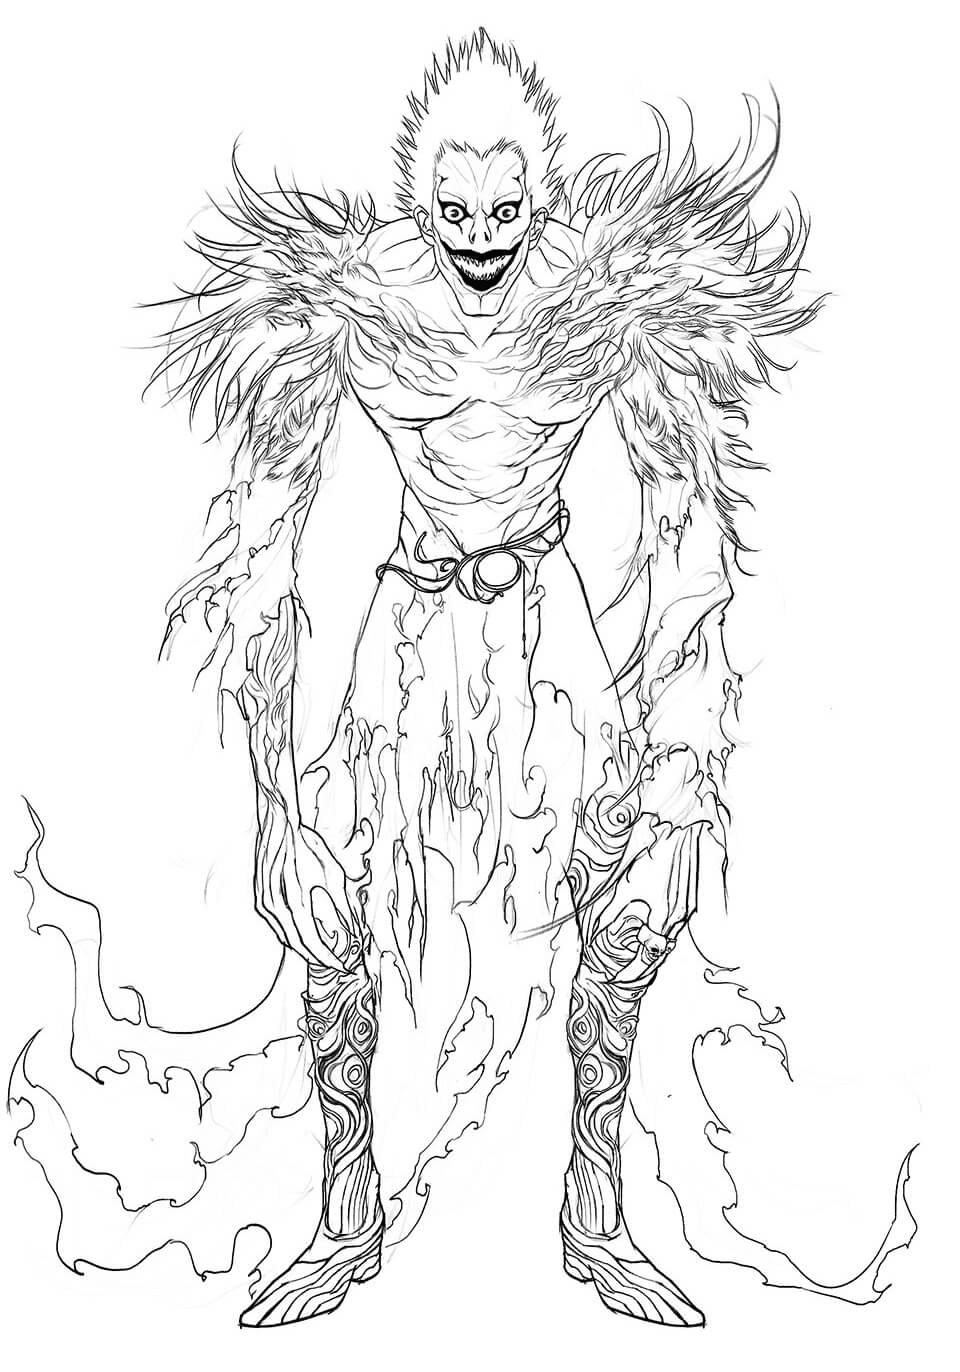 Ryuk from Death Note Coloring Page